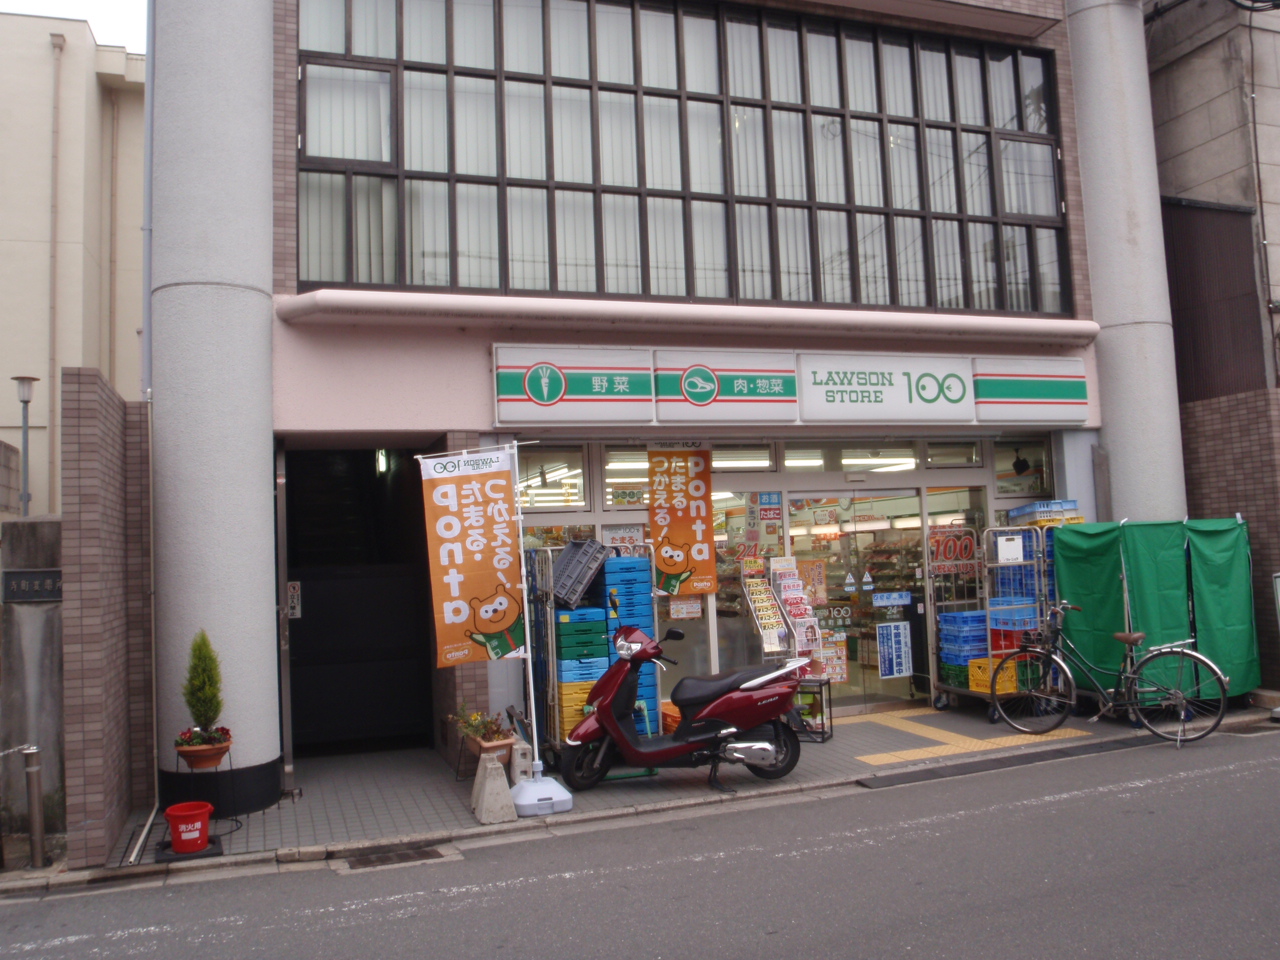 Convenience store. LAWSONSTORE100 50m to the bottom (convenience store)